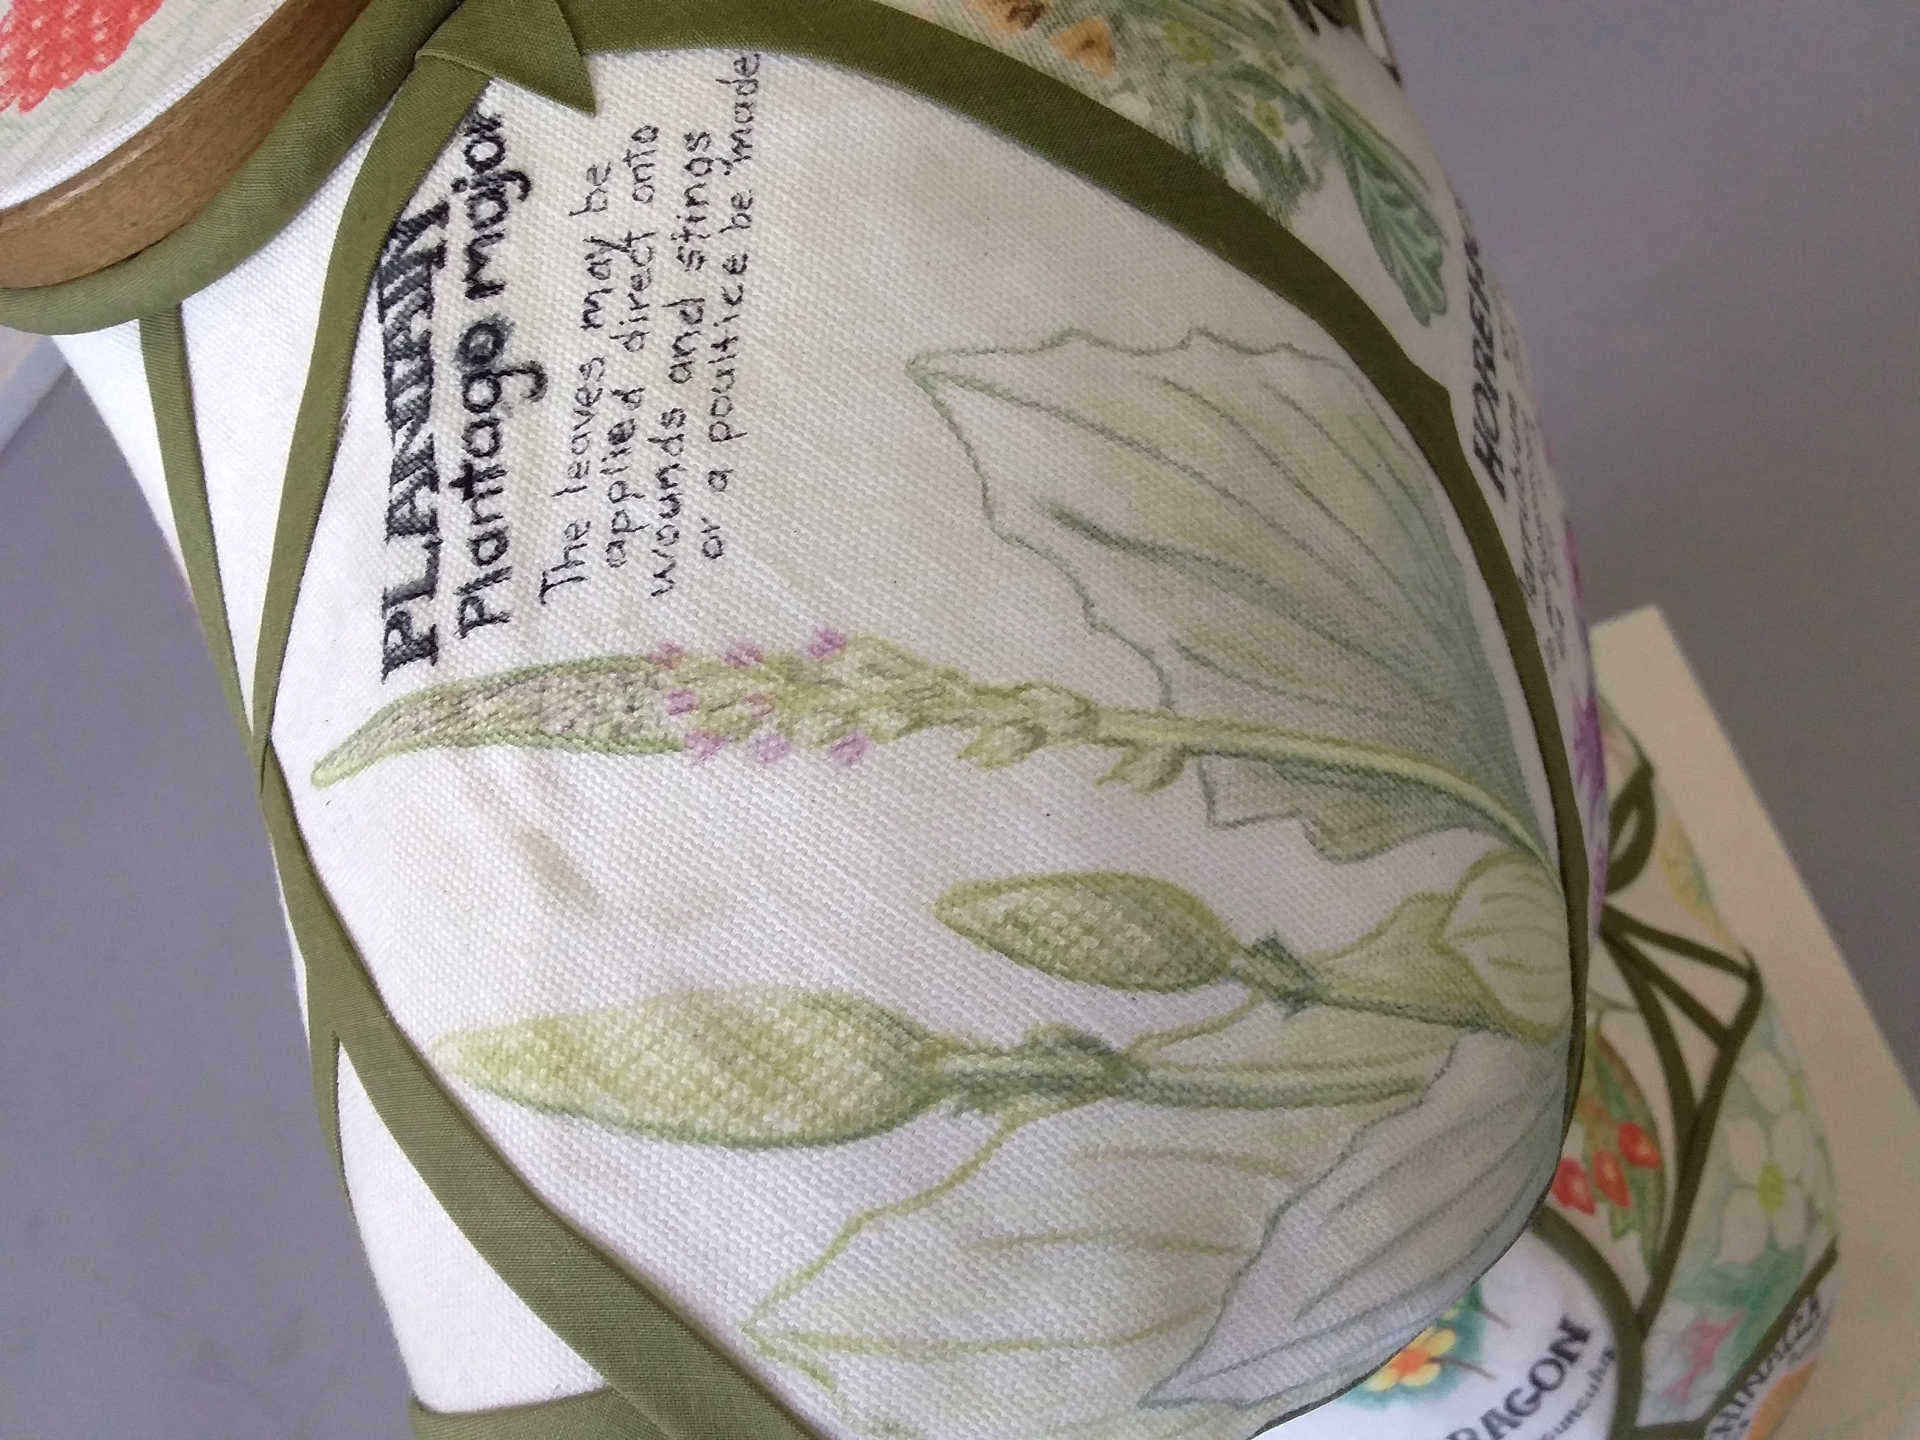 A close-up detail shot of 'Disempowerment' by Libby Bloxham, showing a white fabric panel covering the left shoulder of a female torso mannequin. The panel is filled with a pencil illustration of green leaves and sprigs with tiny purple flowers, and the text: 'Plantain', 'Plantago major', 'The leaves may be applied direct onto wounds and stings or a poultice be made'.